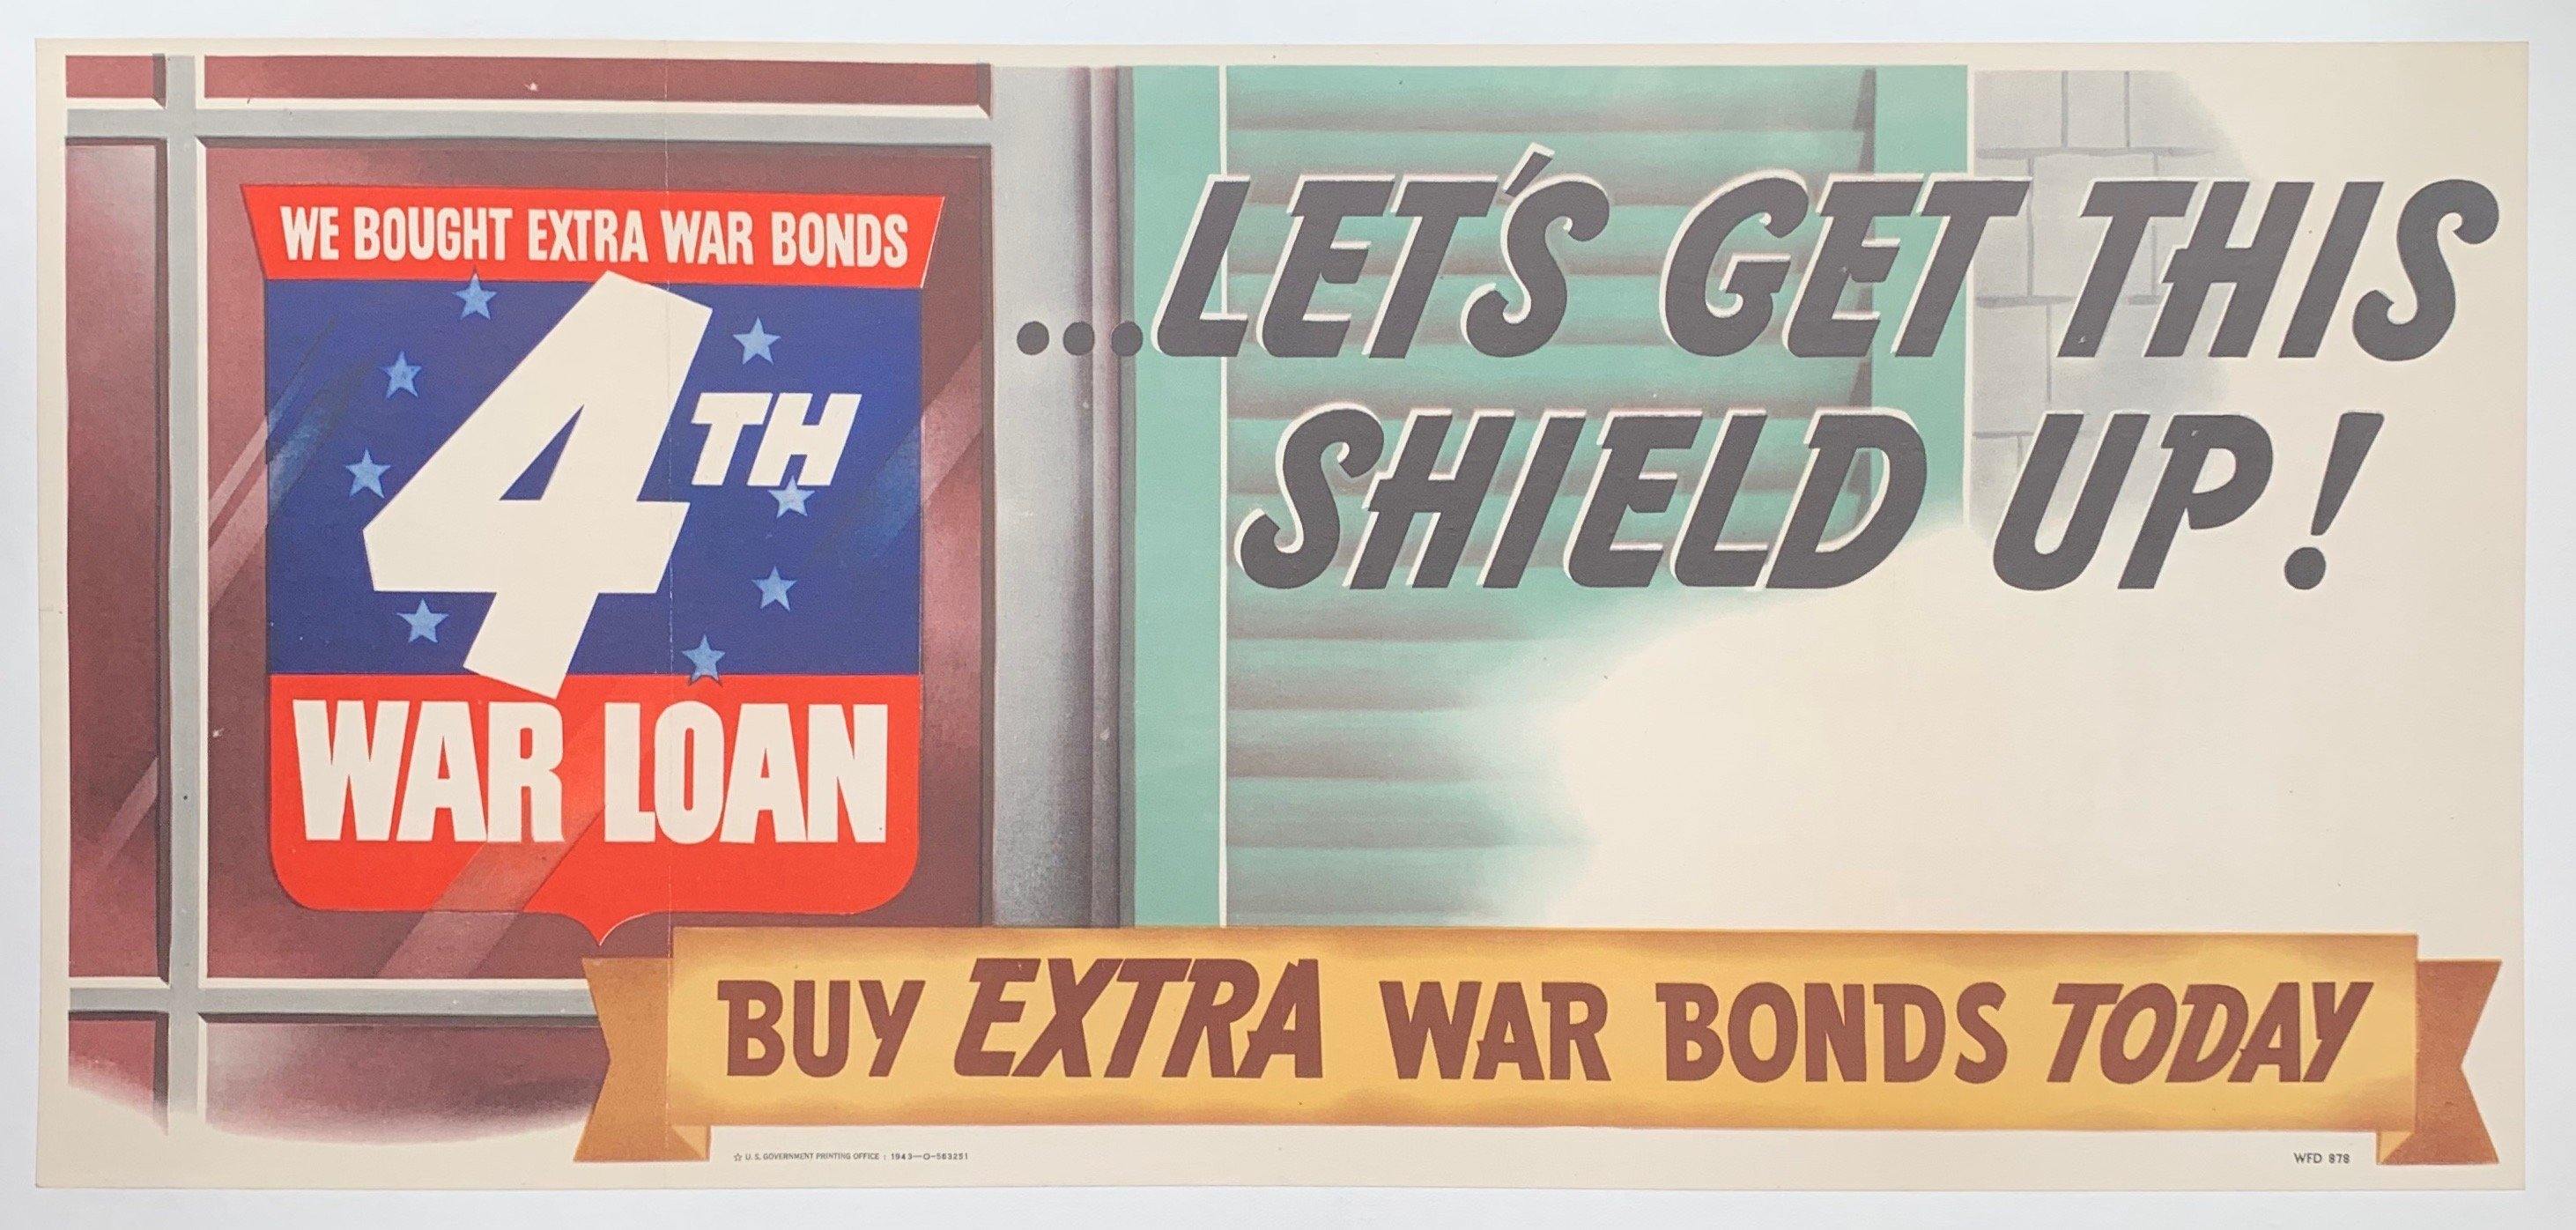 We Bought Extra War Bonds 4th War Loan. Let's Get This Shield Up! - Poster Museum